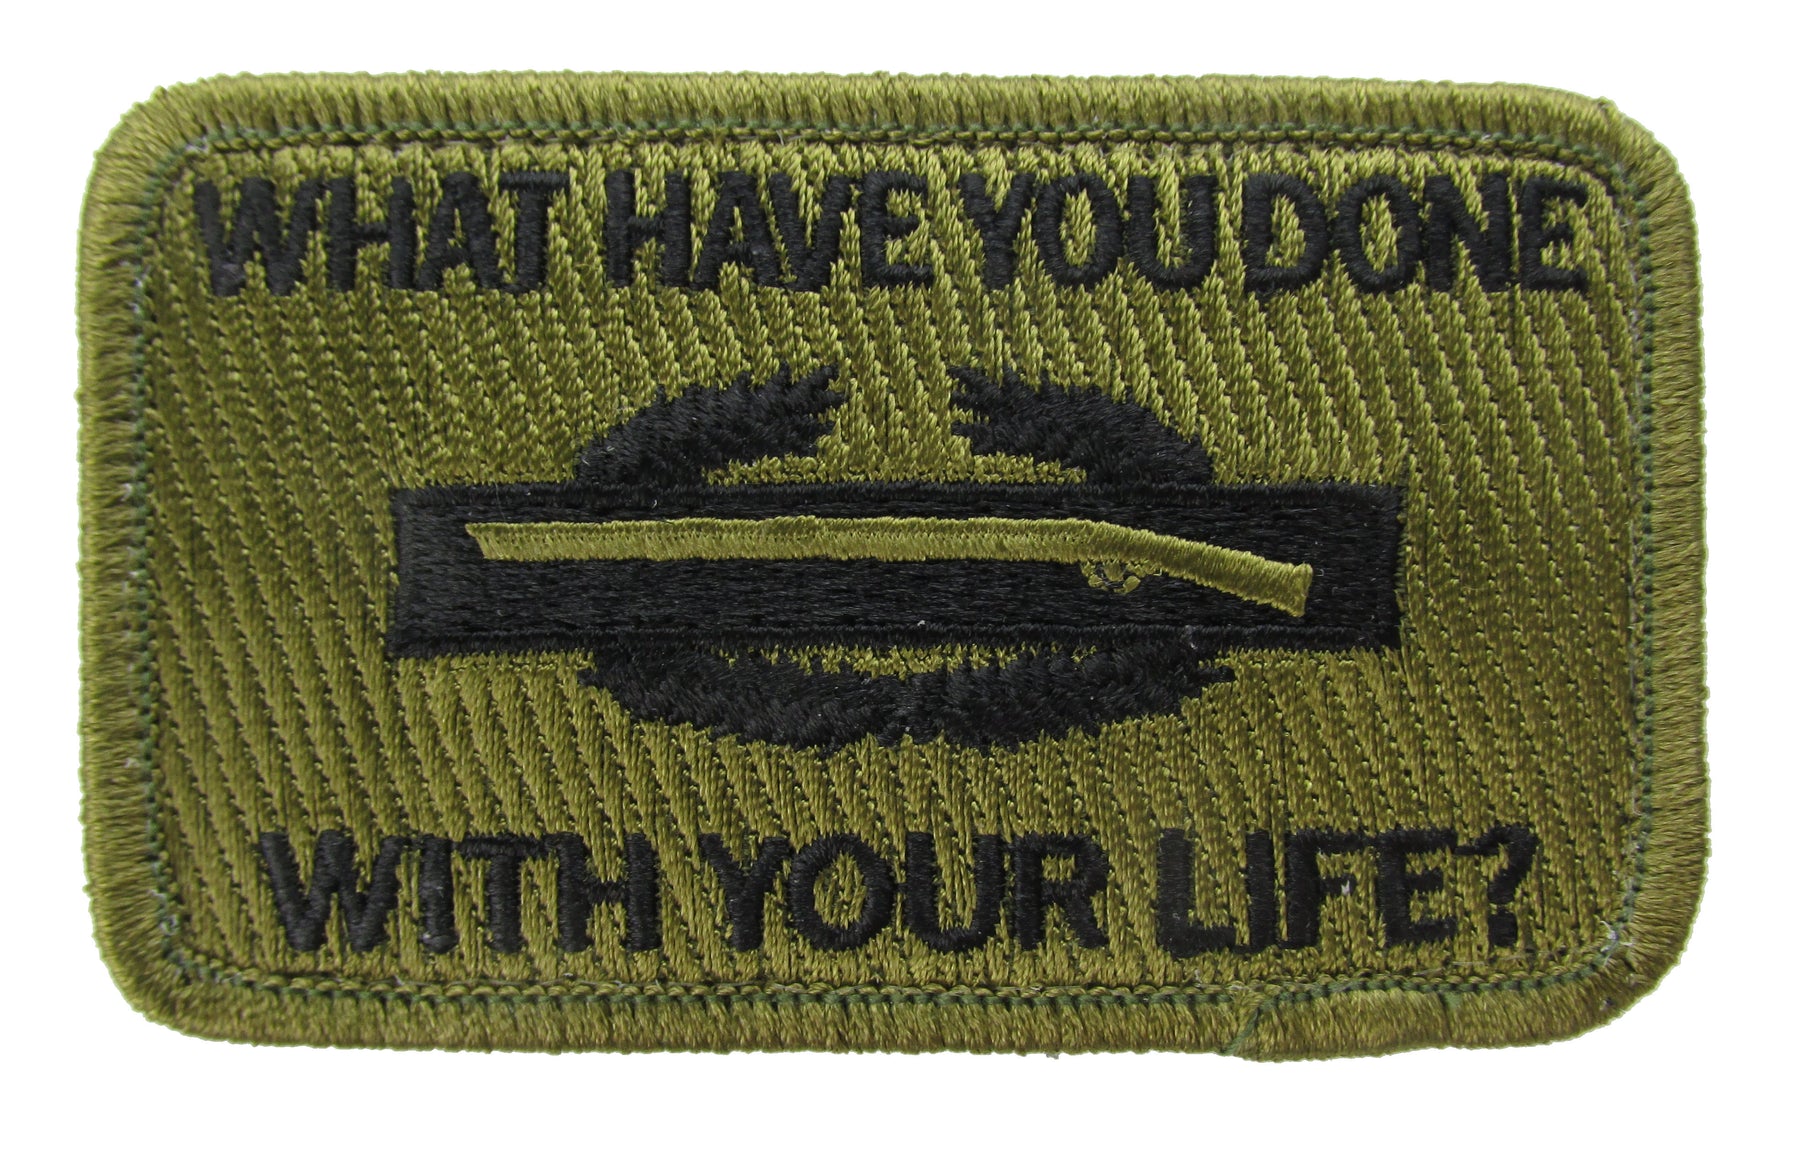 CIB What Have You Done With Your Life Morale Patch - Various Colors